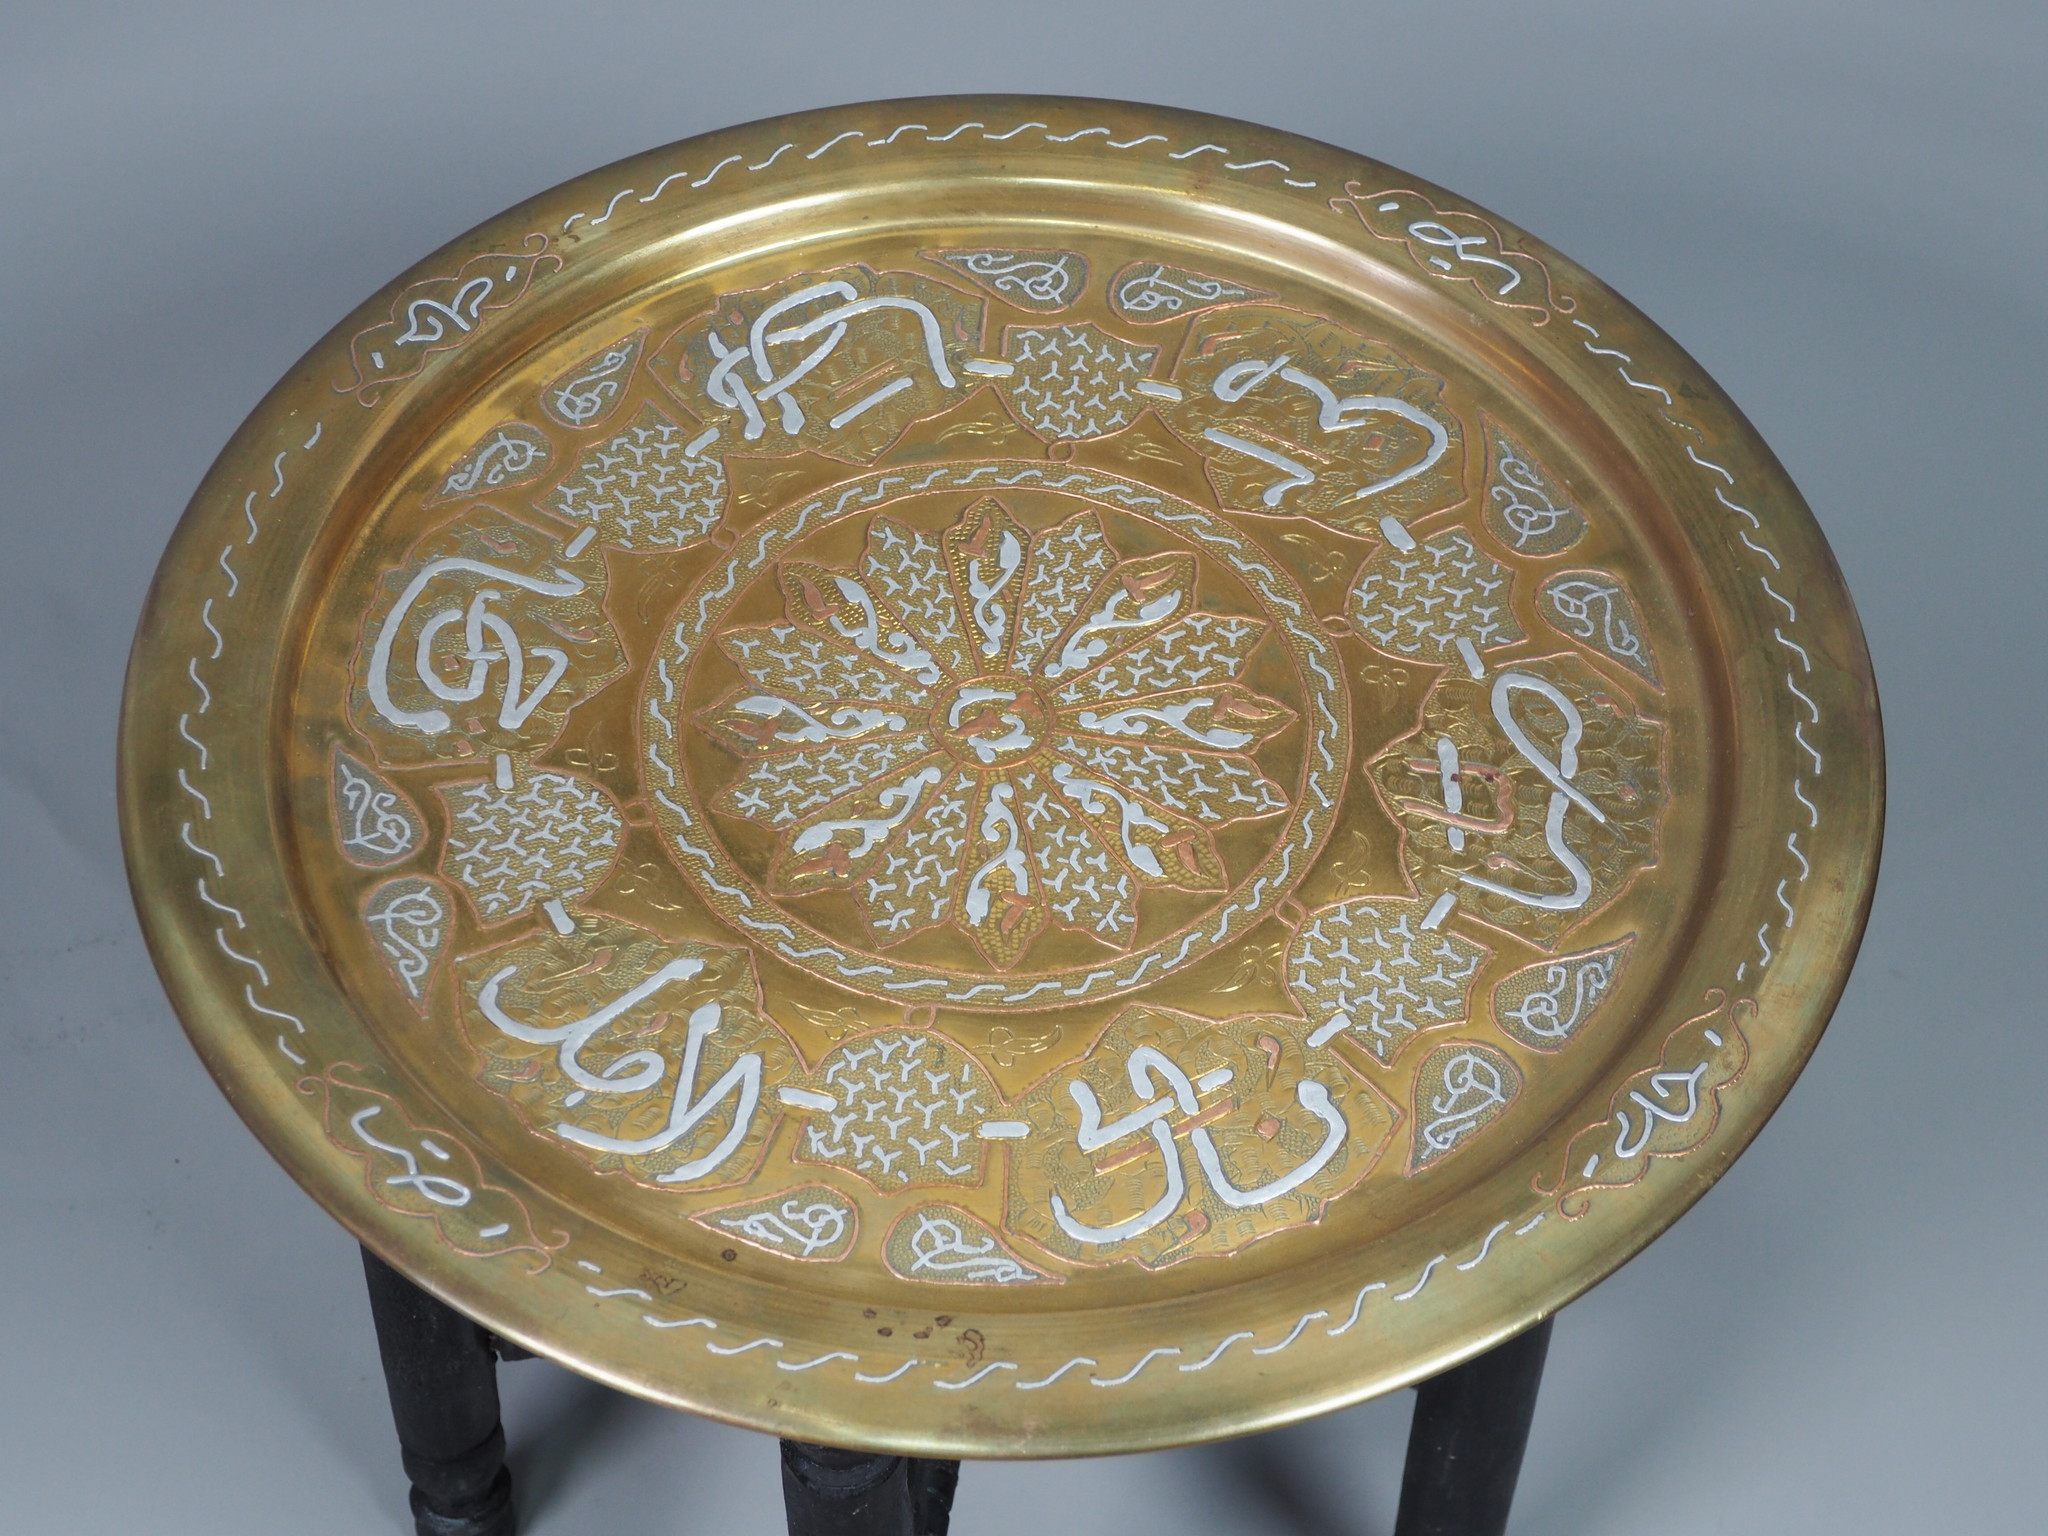 45 cm Antique ottoman orient Islamic  Hammer Engraved Brass table Tray Syria Morocco, Egypt Mamluk Cairoware with arabic calligraphy 21/3